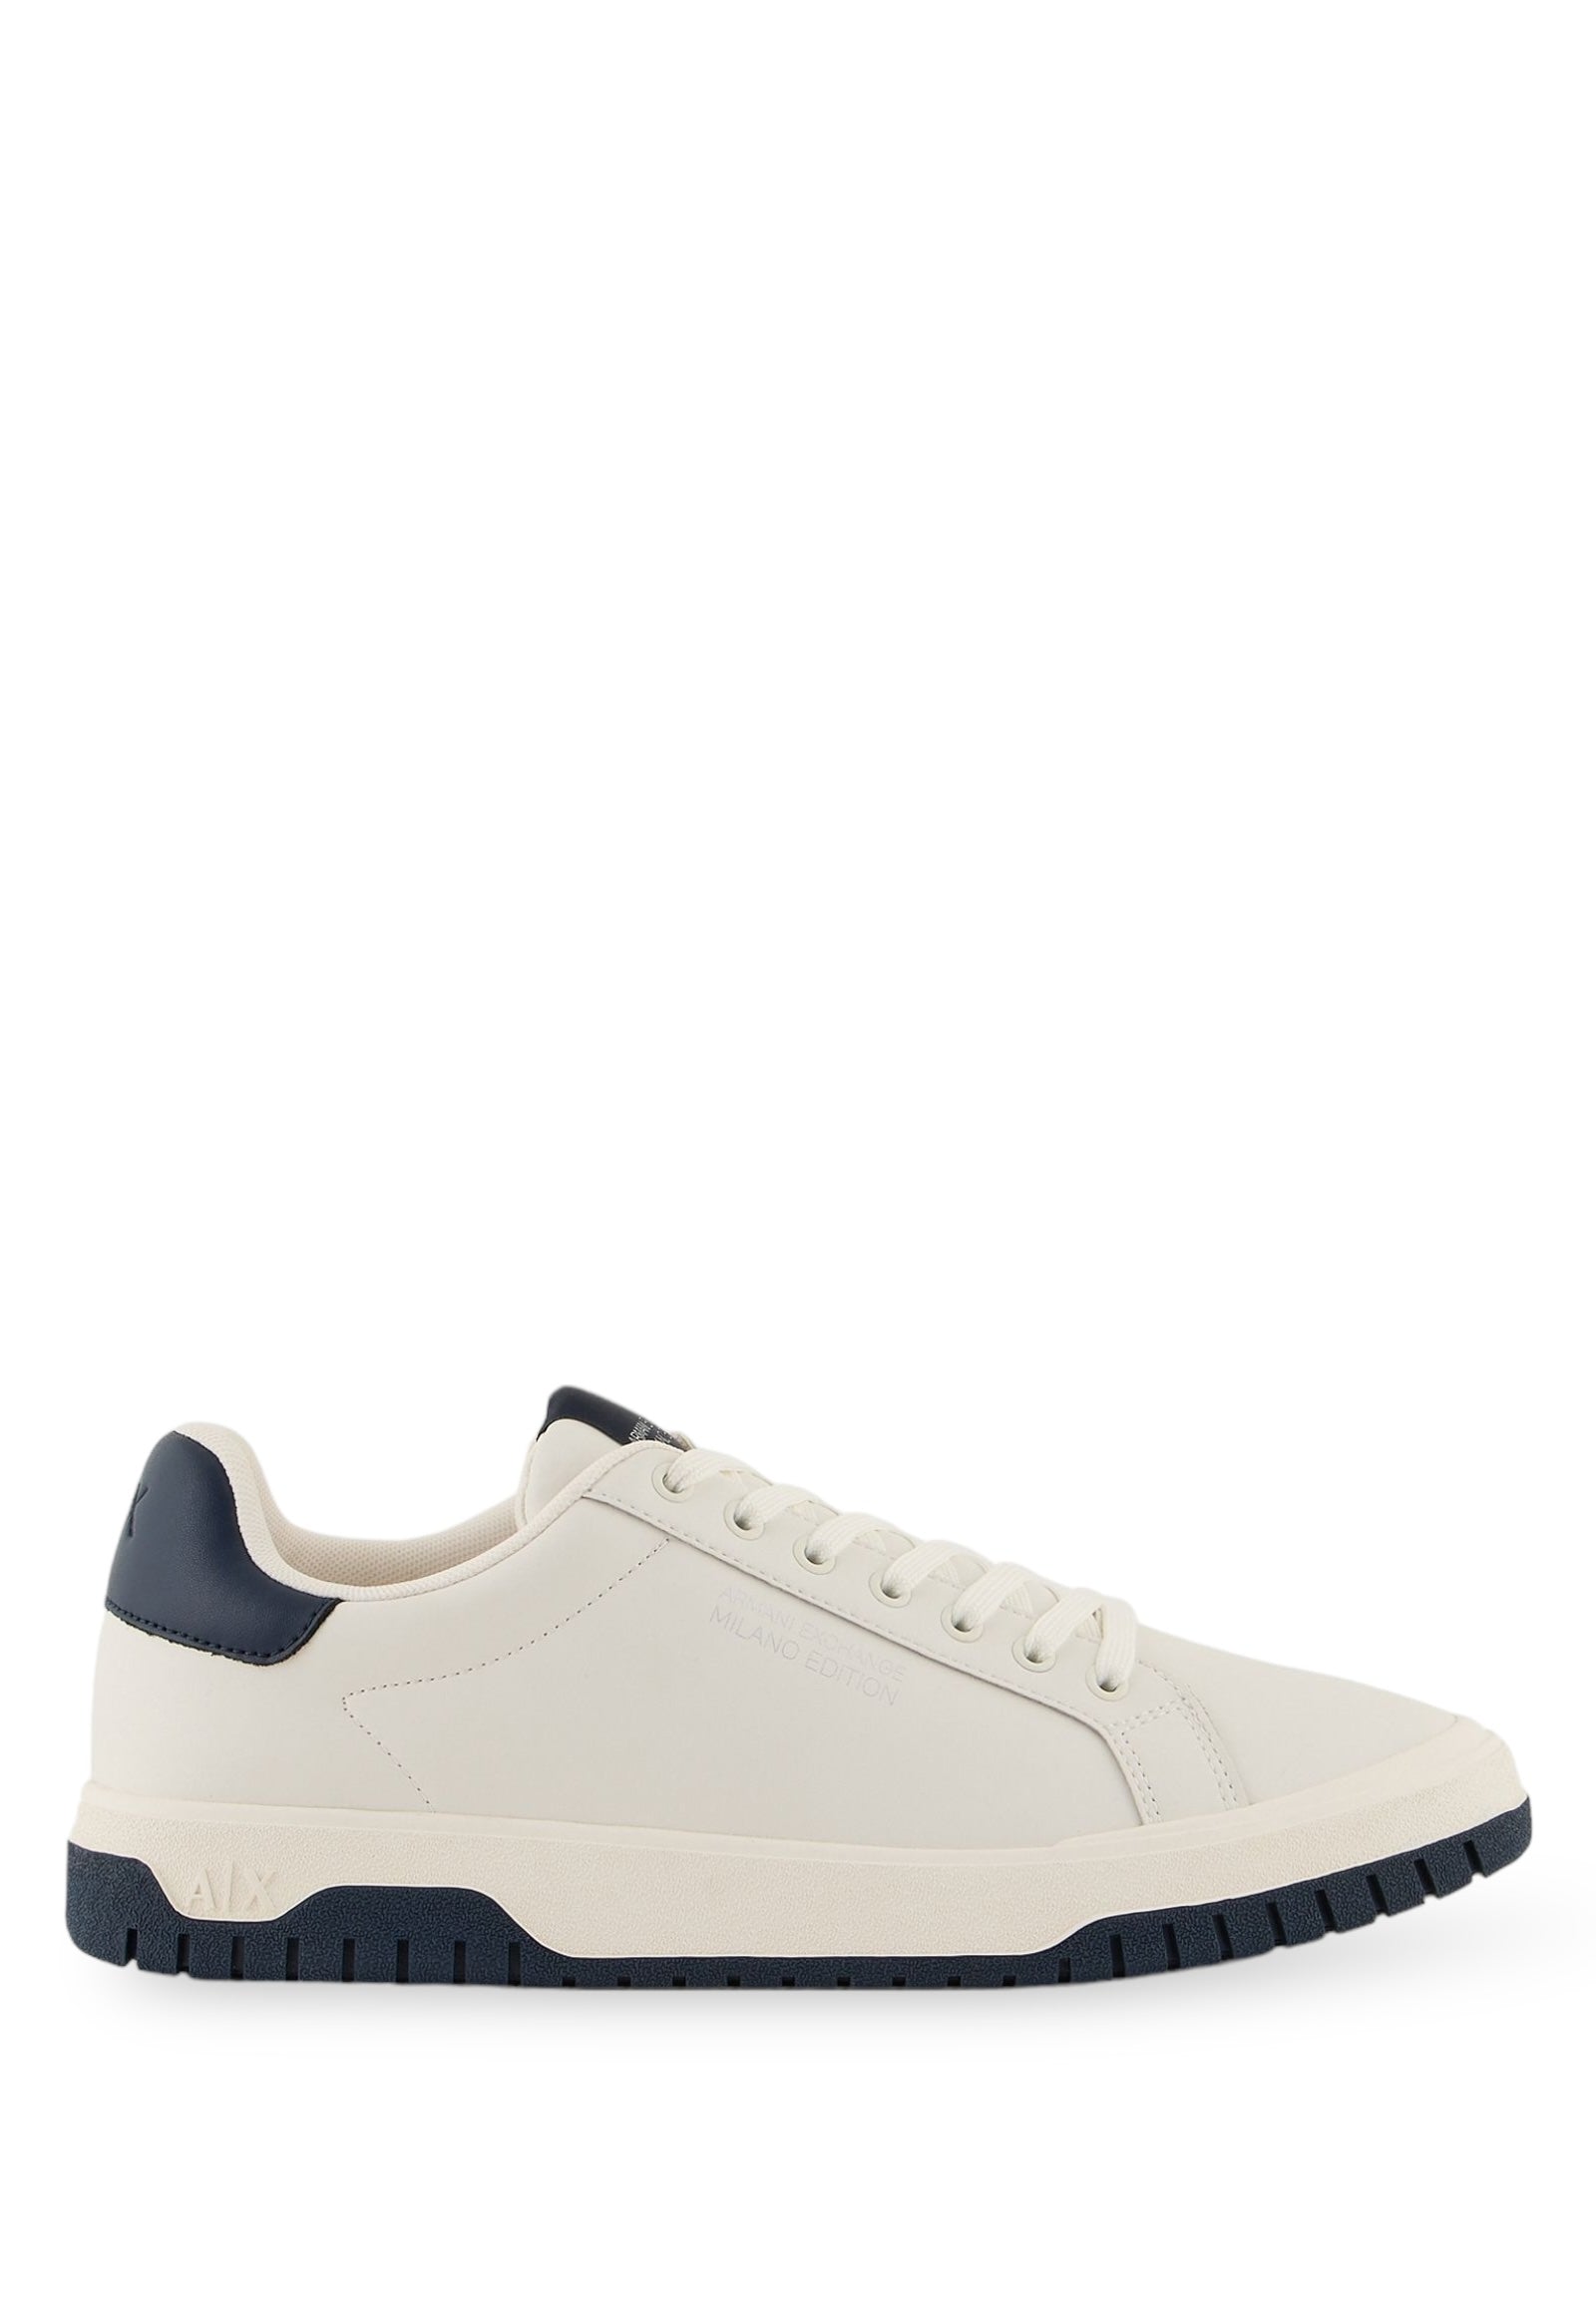 Sneakers Xux212 Off White+navy